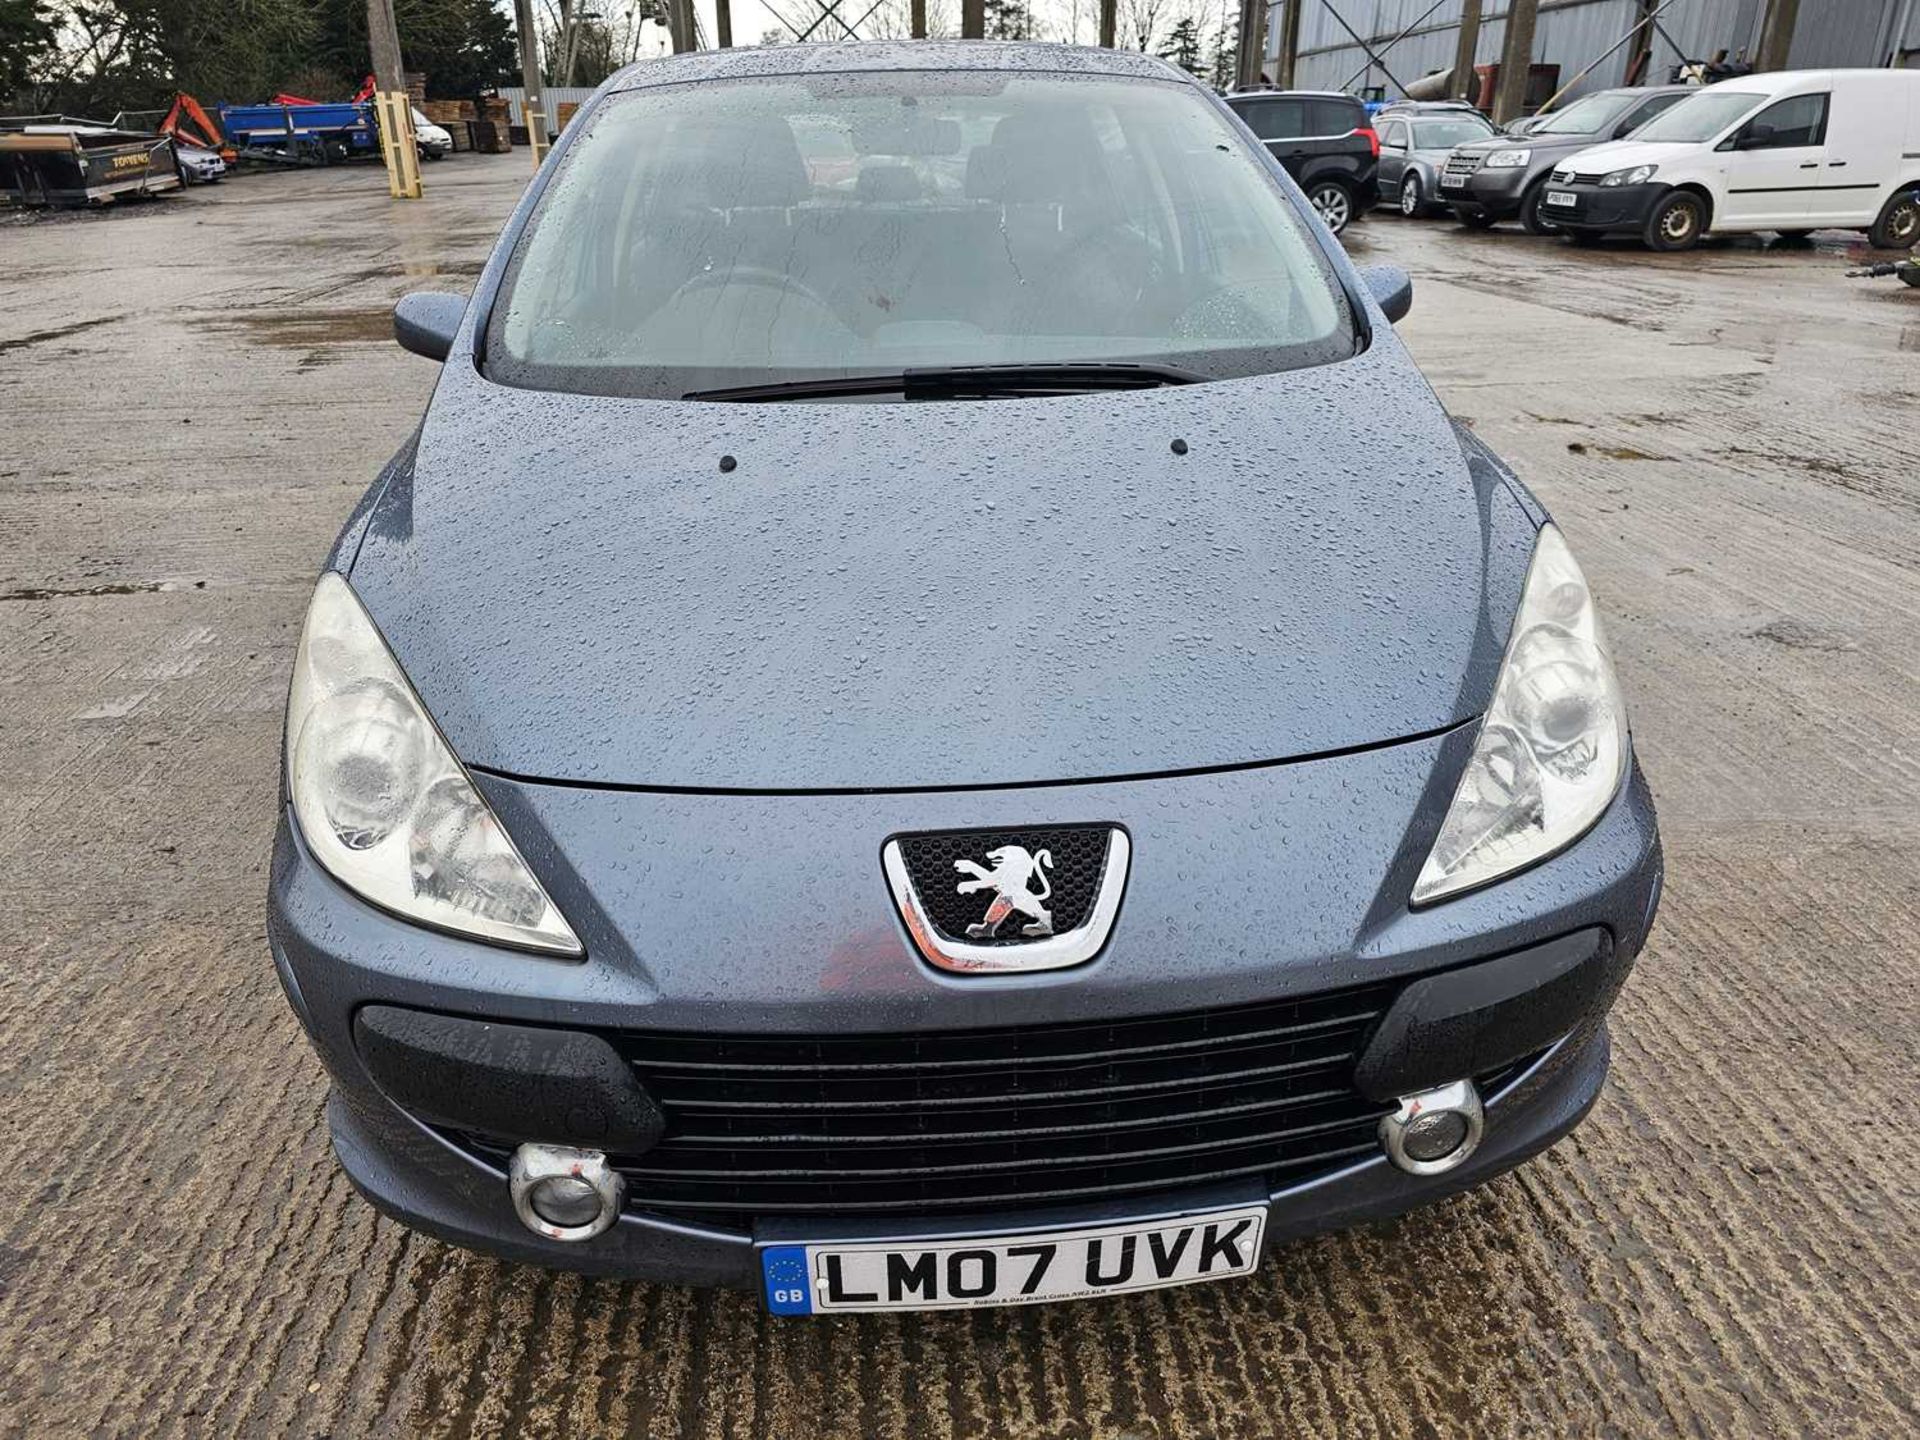 2007 Peugeot 307 X-line, 5 Speed, A/C (Reg. Docs. Available, Tested 11/24) - Image 2 of 28